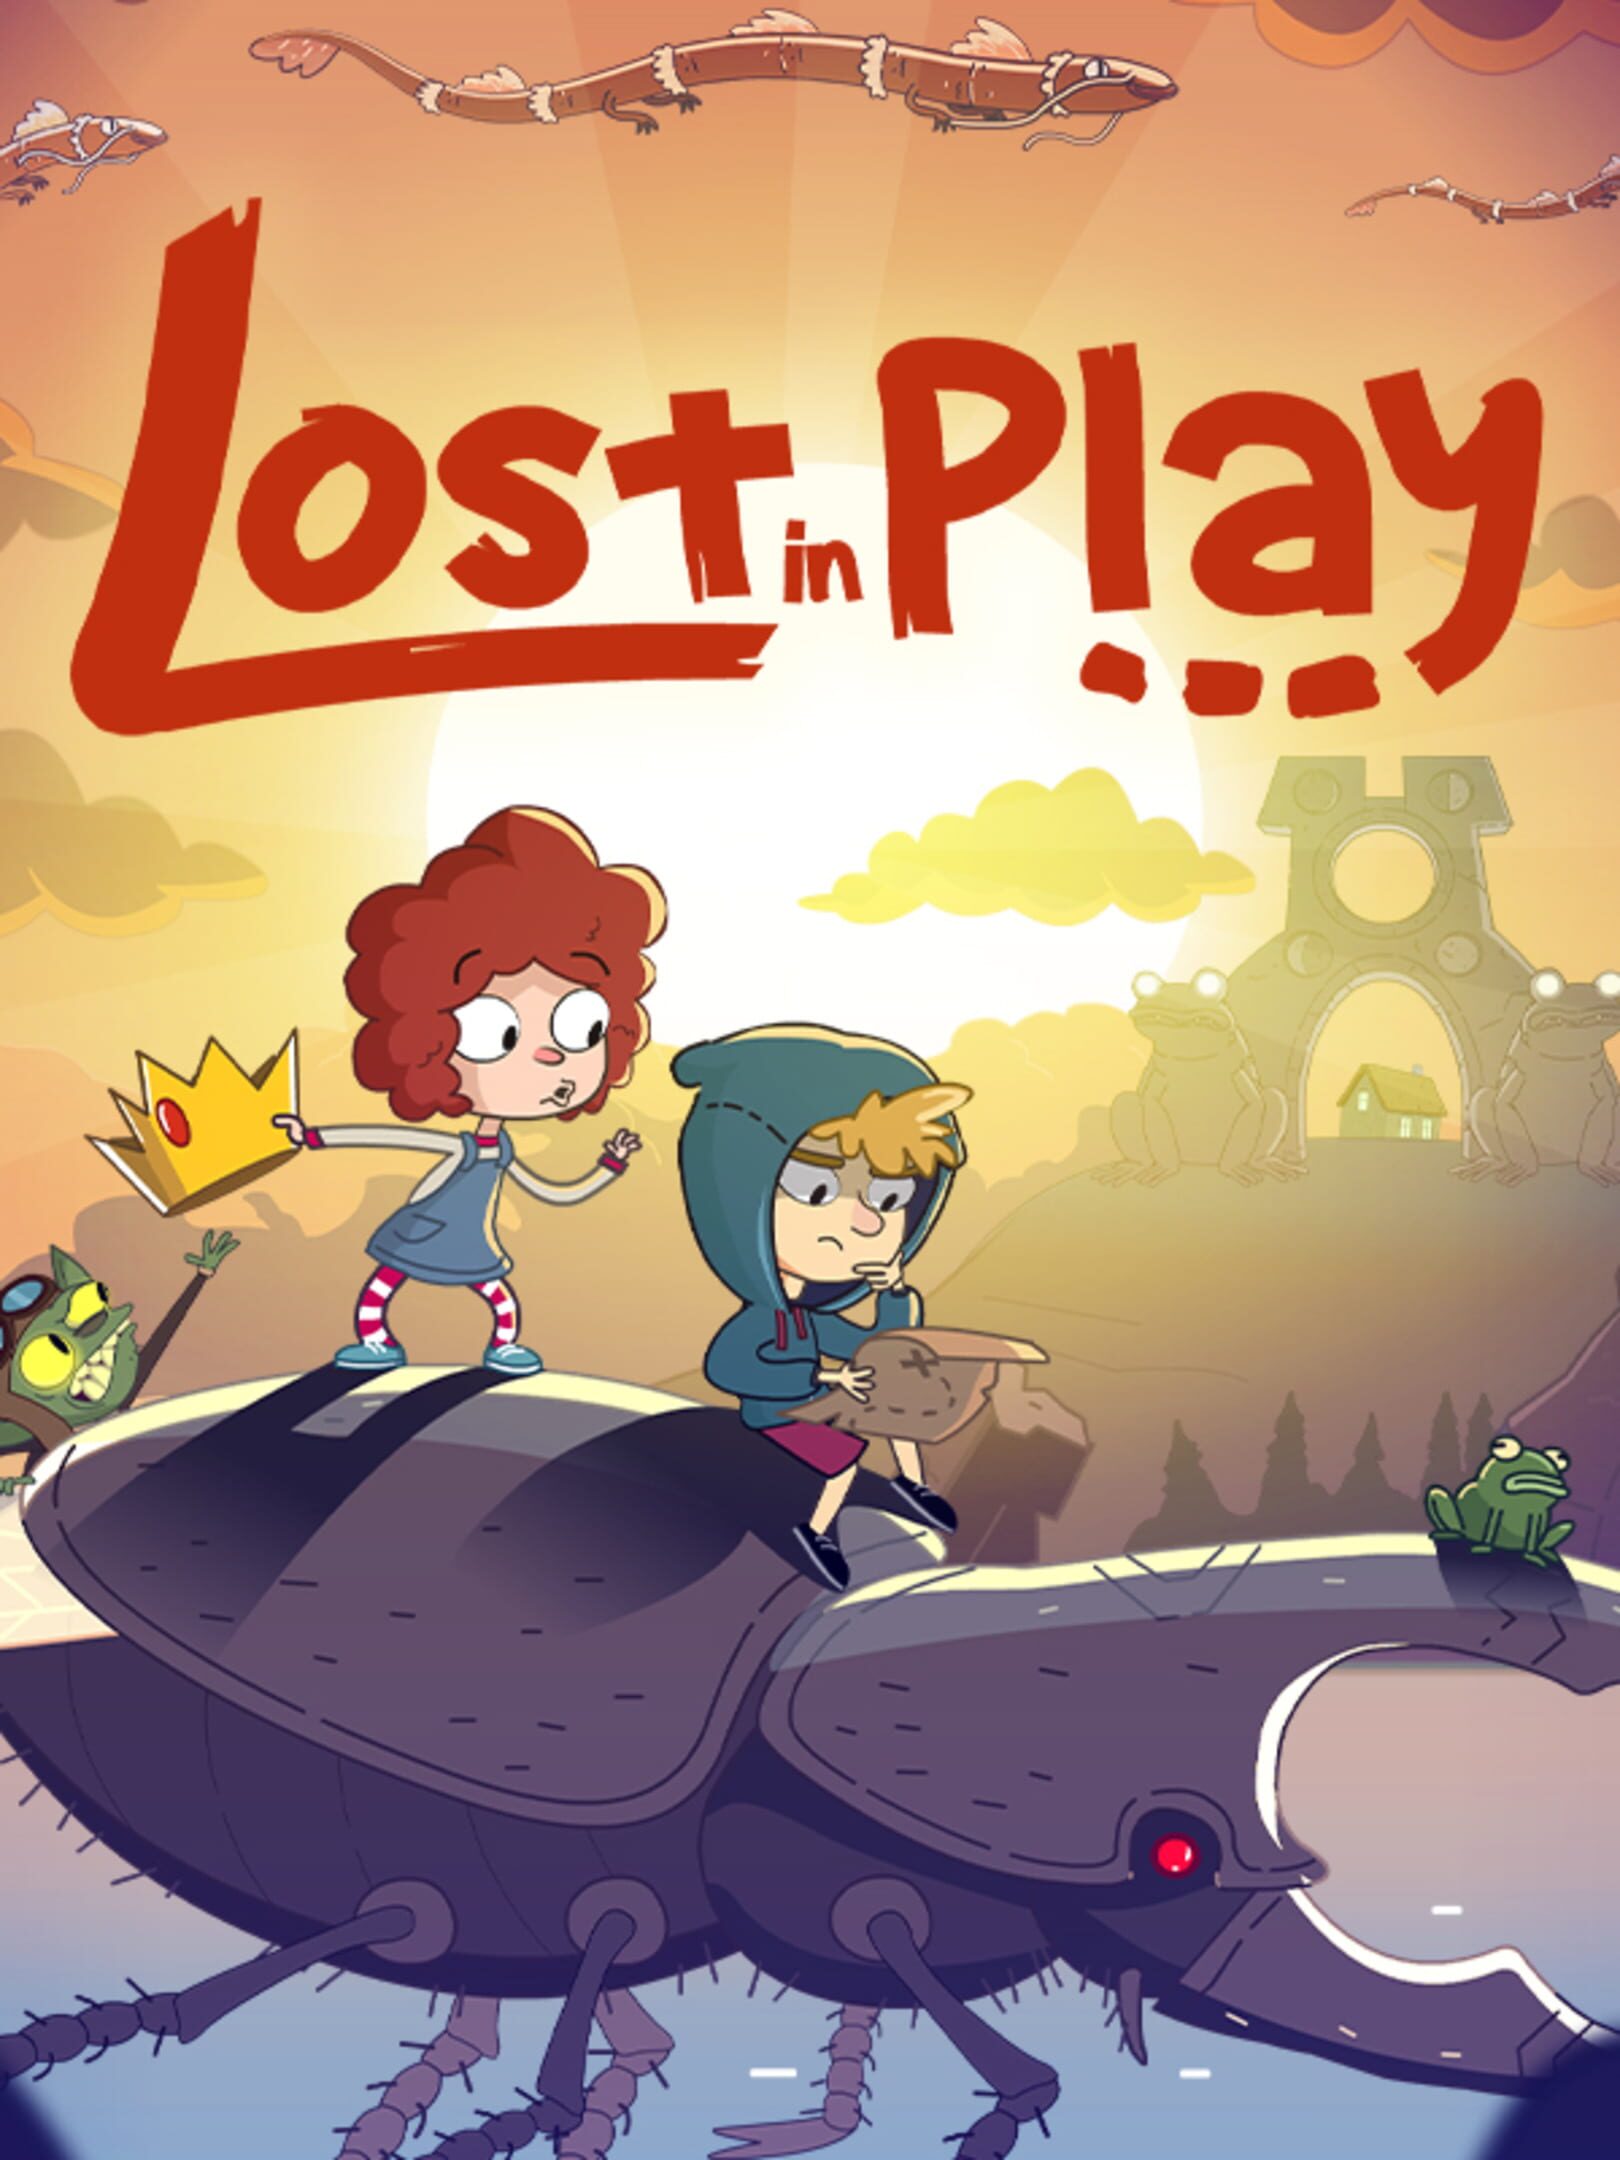 Lost in play похожие игры. Lost игра. Лост ин плей. Lost in Play game. Lost in Play обложка.